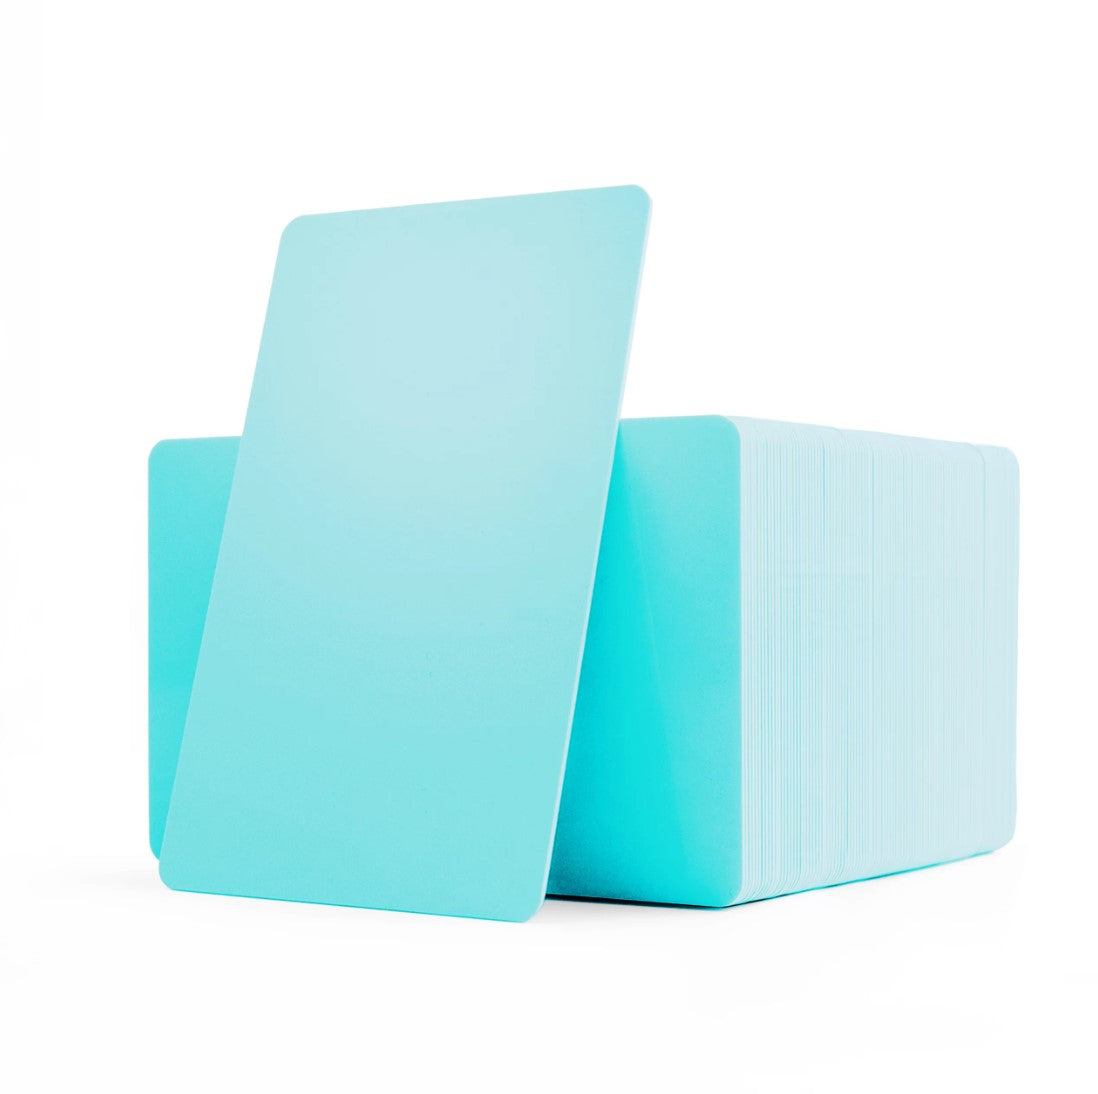 PVC CR80 Light Blue Coloured Cards With Solid Core Coloured Edges - 1 - 100